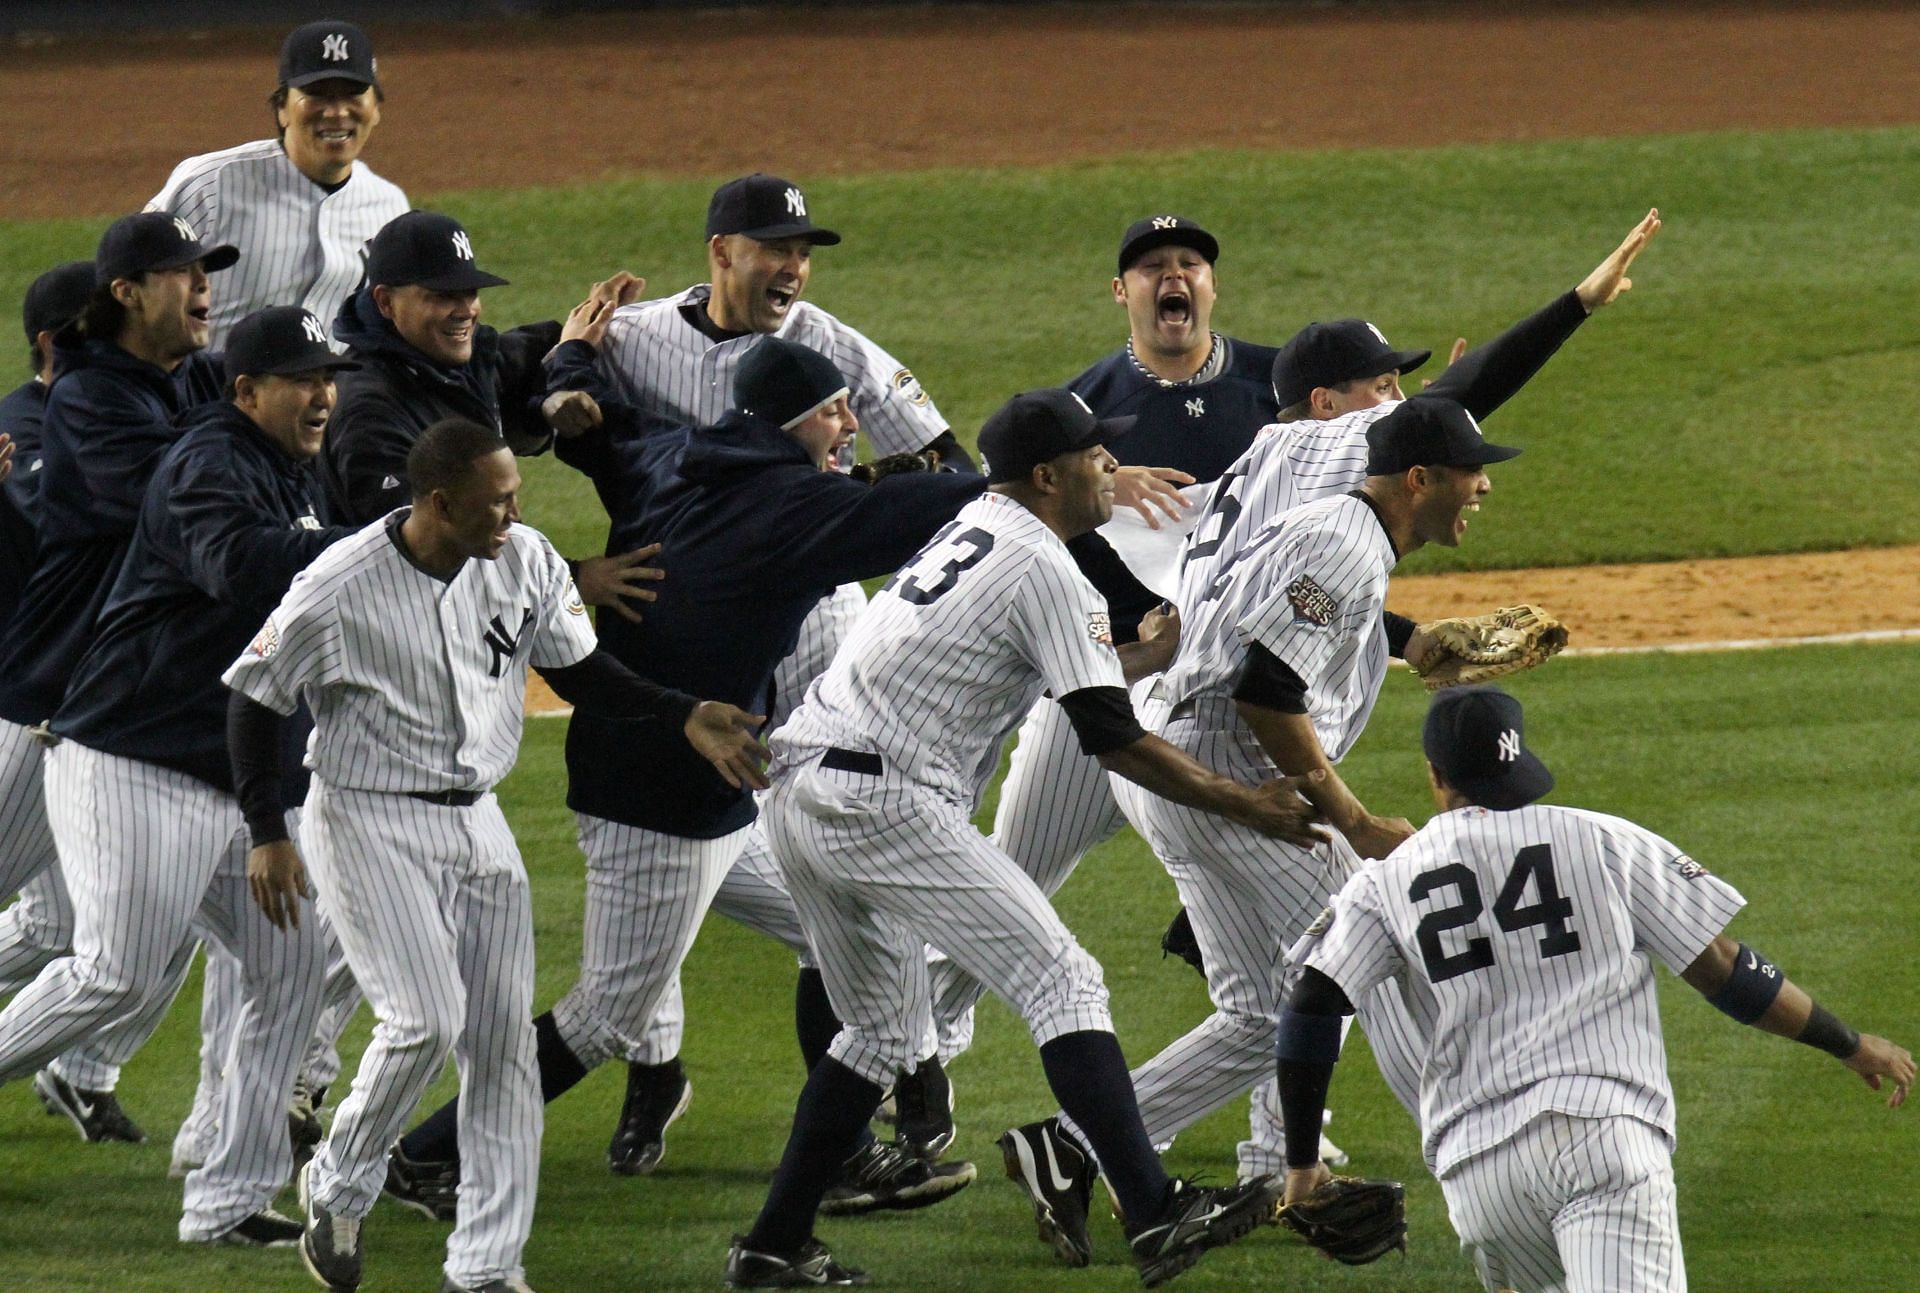 NEW YORK - NOVEMBER 04: The New York Yankees celebrate after their 7-3 win against the Philadelphia Phillies in Game Six of the 2009 MLB World Series at Yankee Stadium on November 4, 2009, in the Bronx borough of New York City. (Photo by Jim McIsaac/Getty Images)